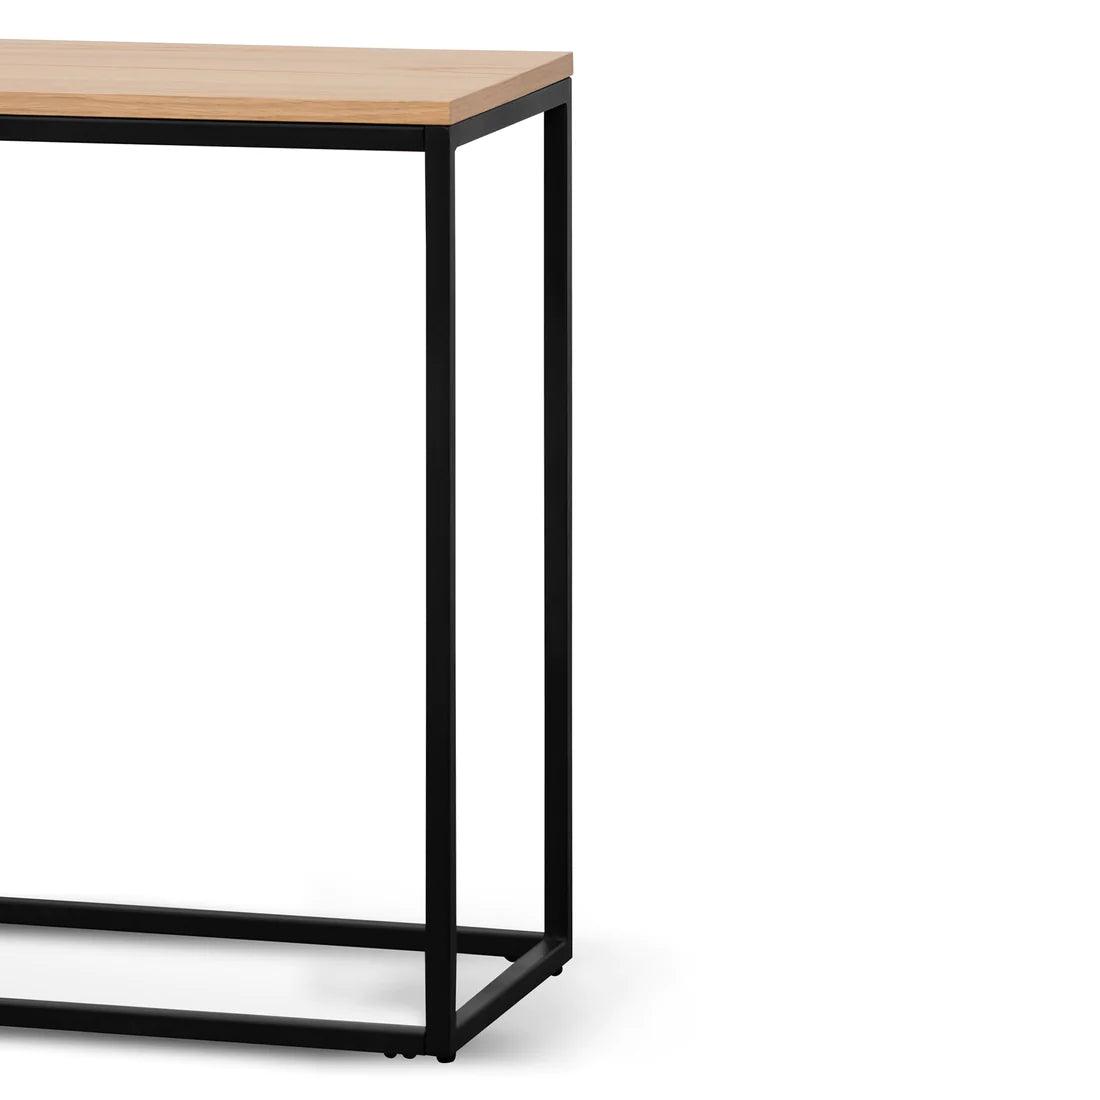 Woody 1.6m Console Table - Natural Top and Black Frame - Furniture Castle